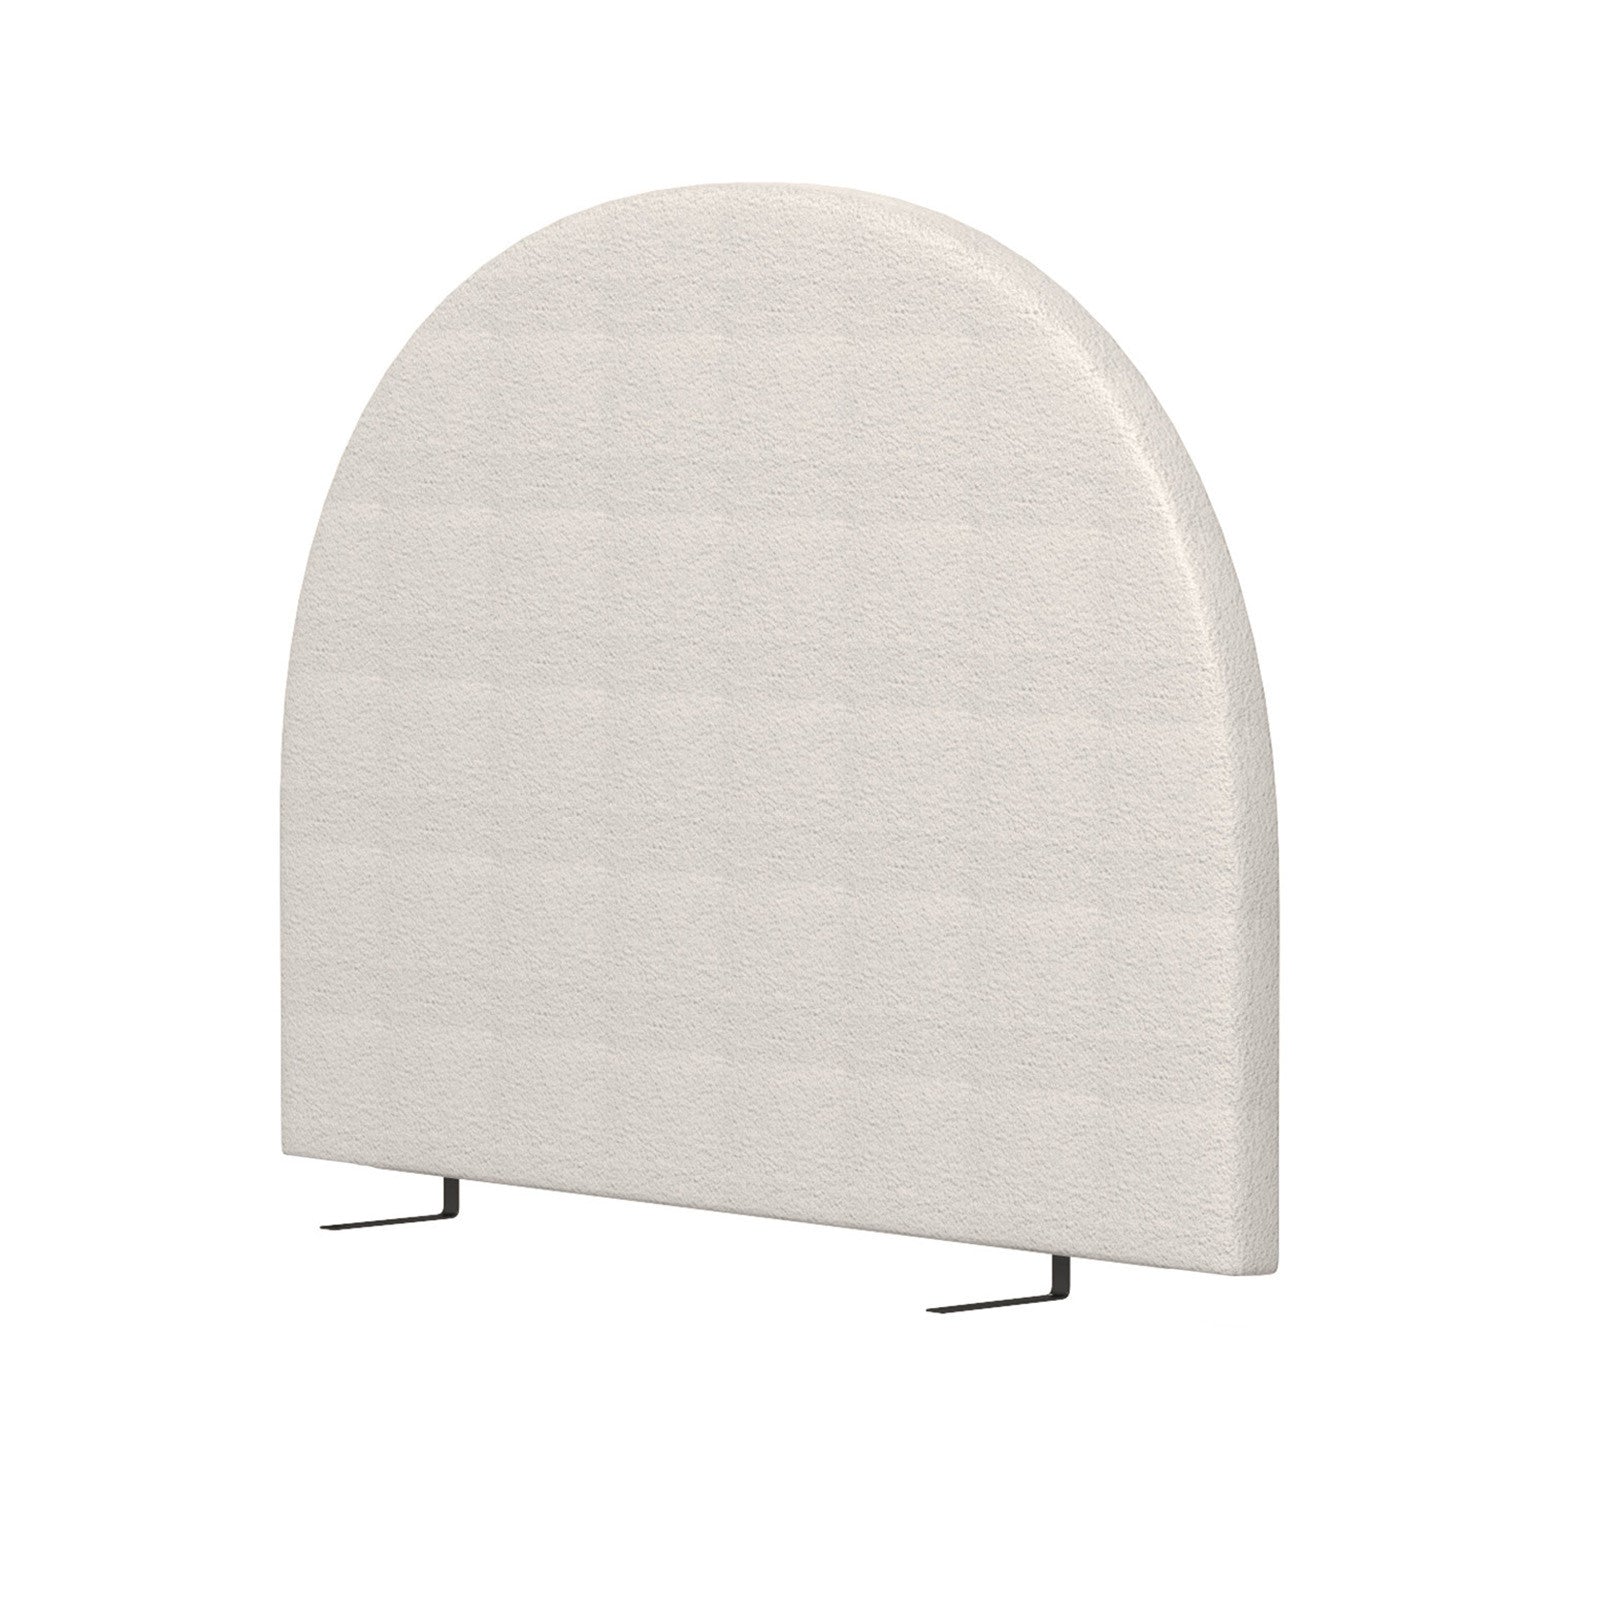 Milano Decor Ariana Curved Boucle Bedhead Headboard Upholstered Cushioned White - Queen - White